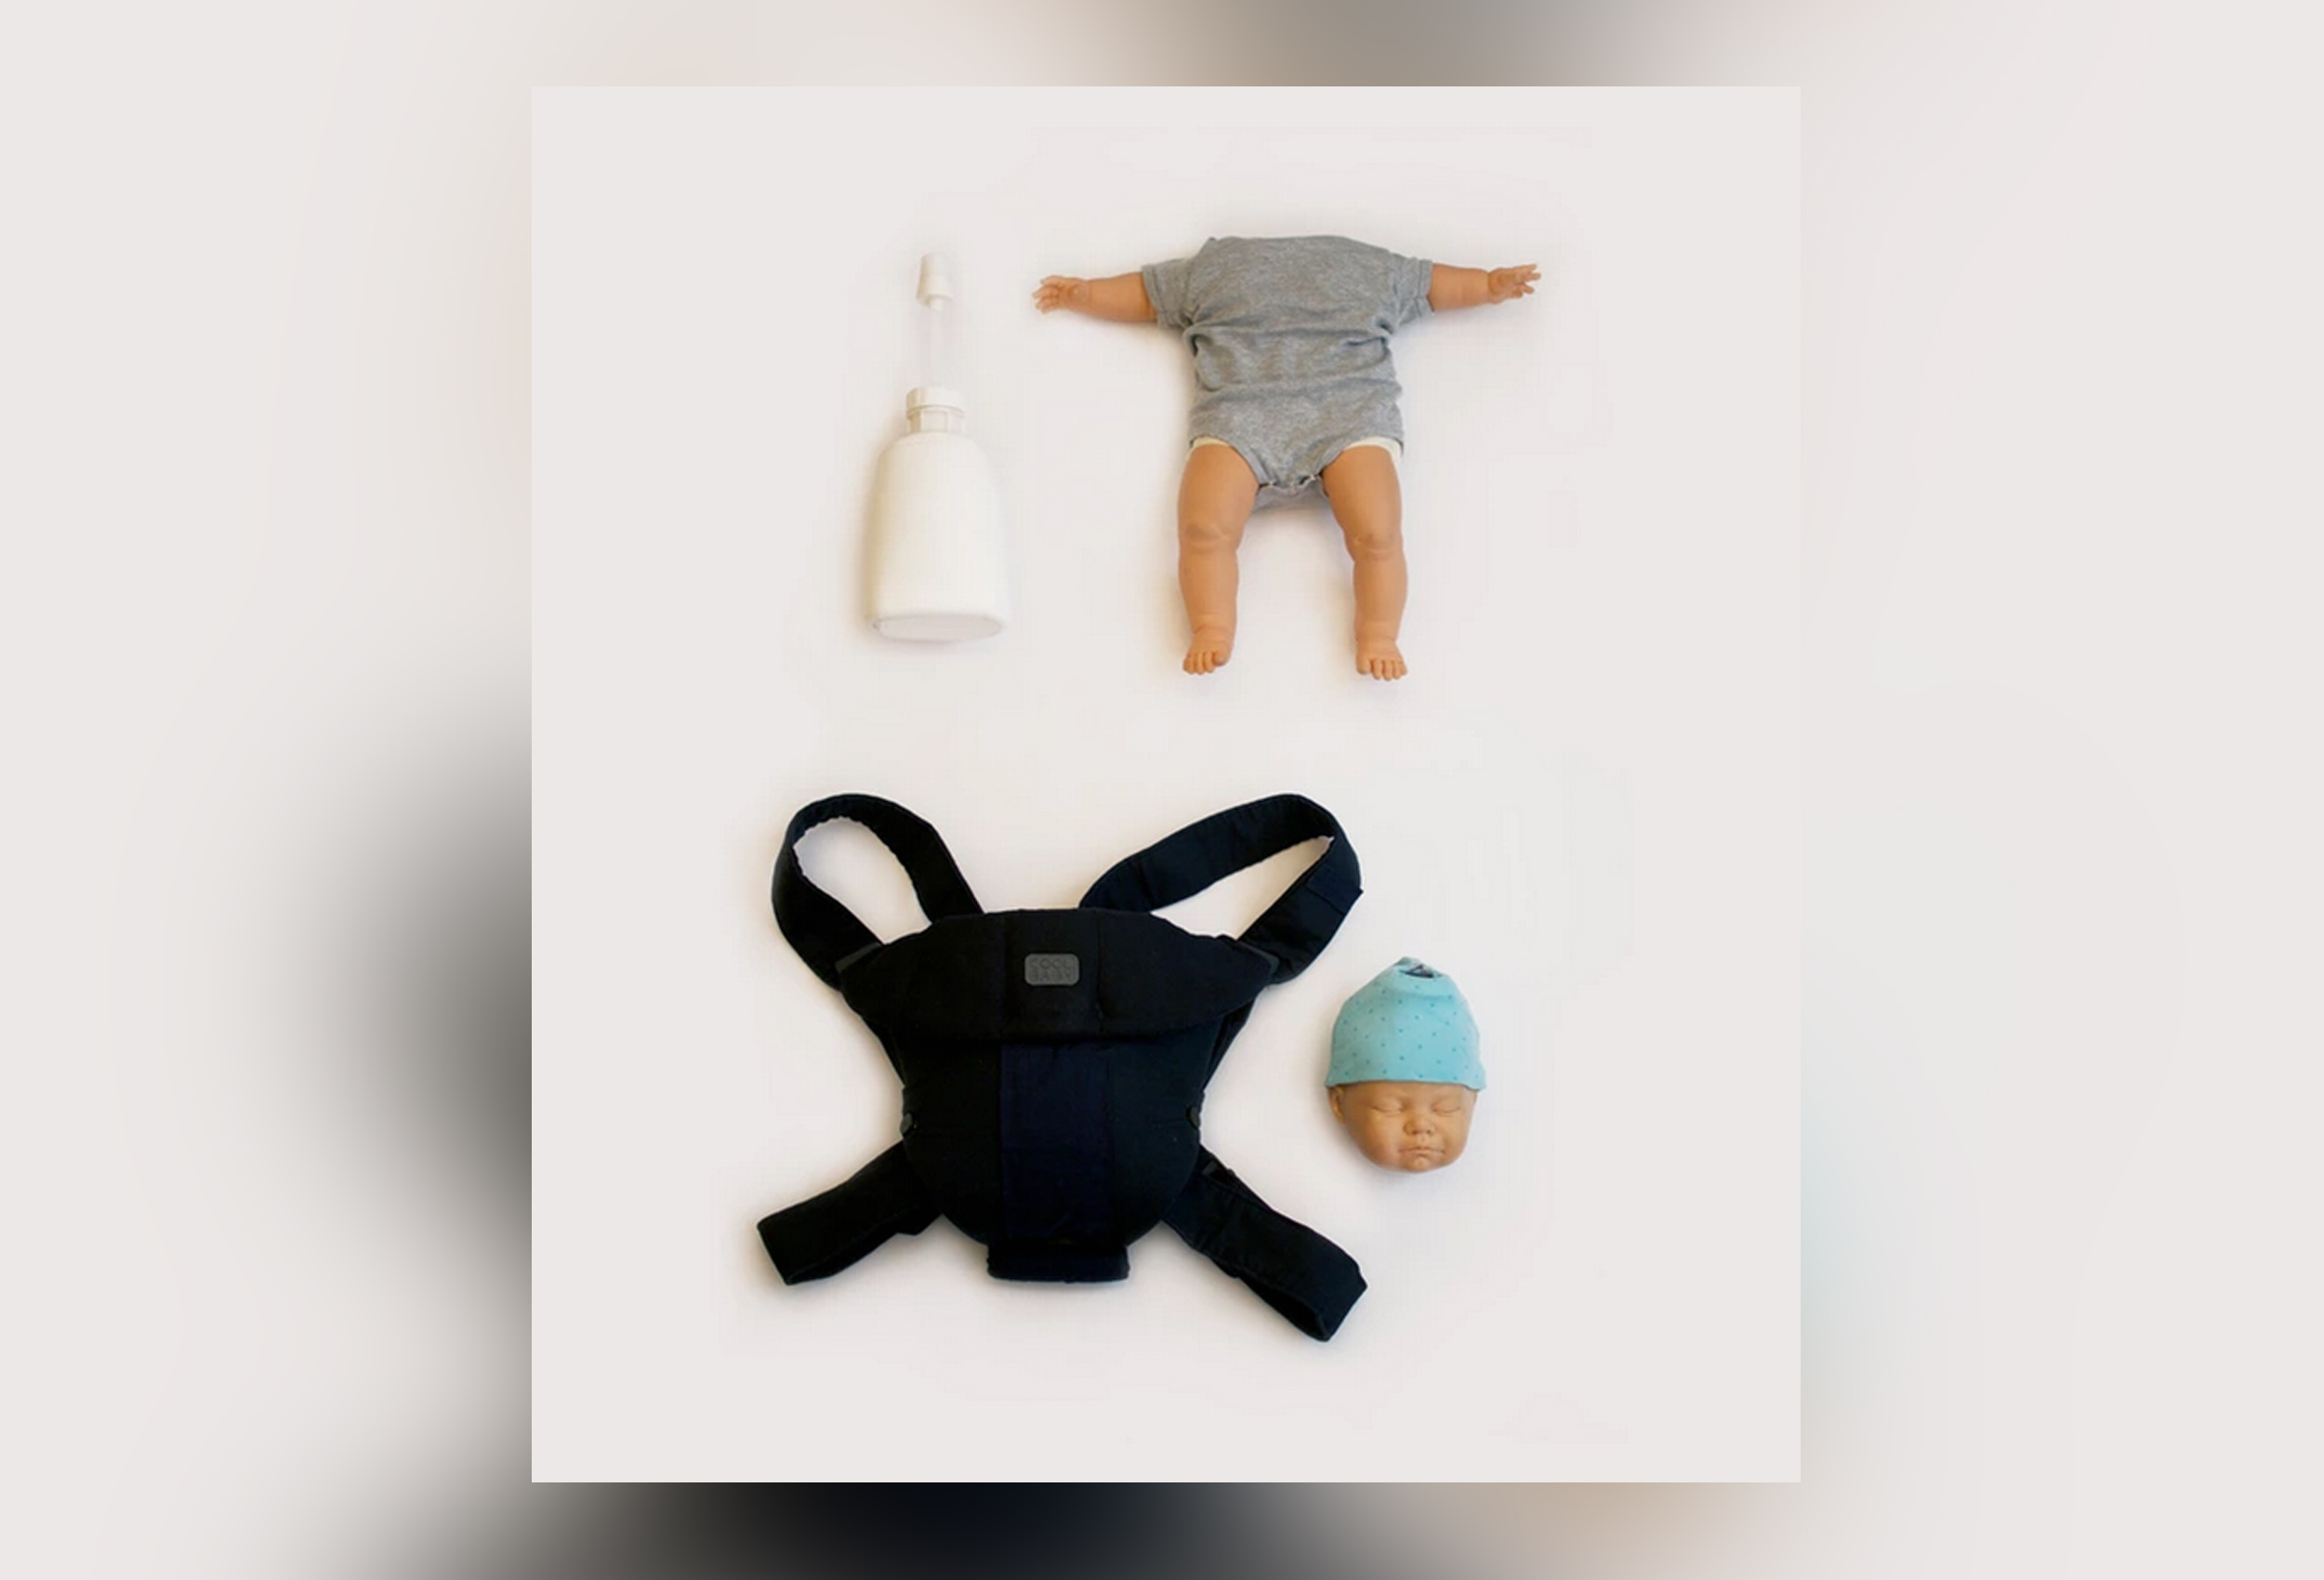 PHOTO: Simon Philion has created a Kickstarter to help manufacture his "Cool Baby" product which is a beverage insulator that looks like a baby in a carrier.